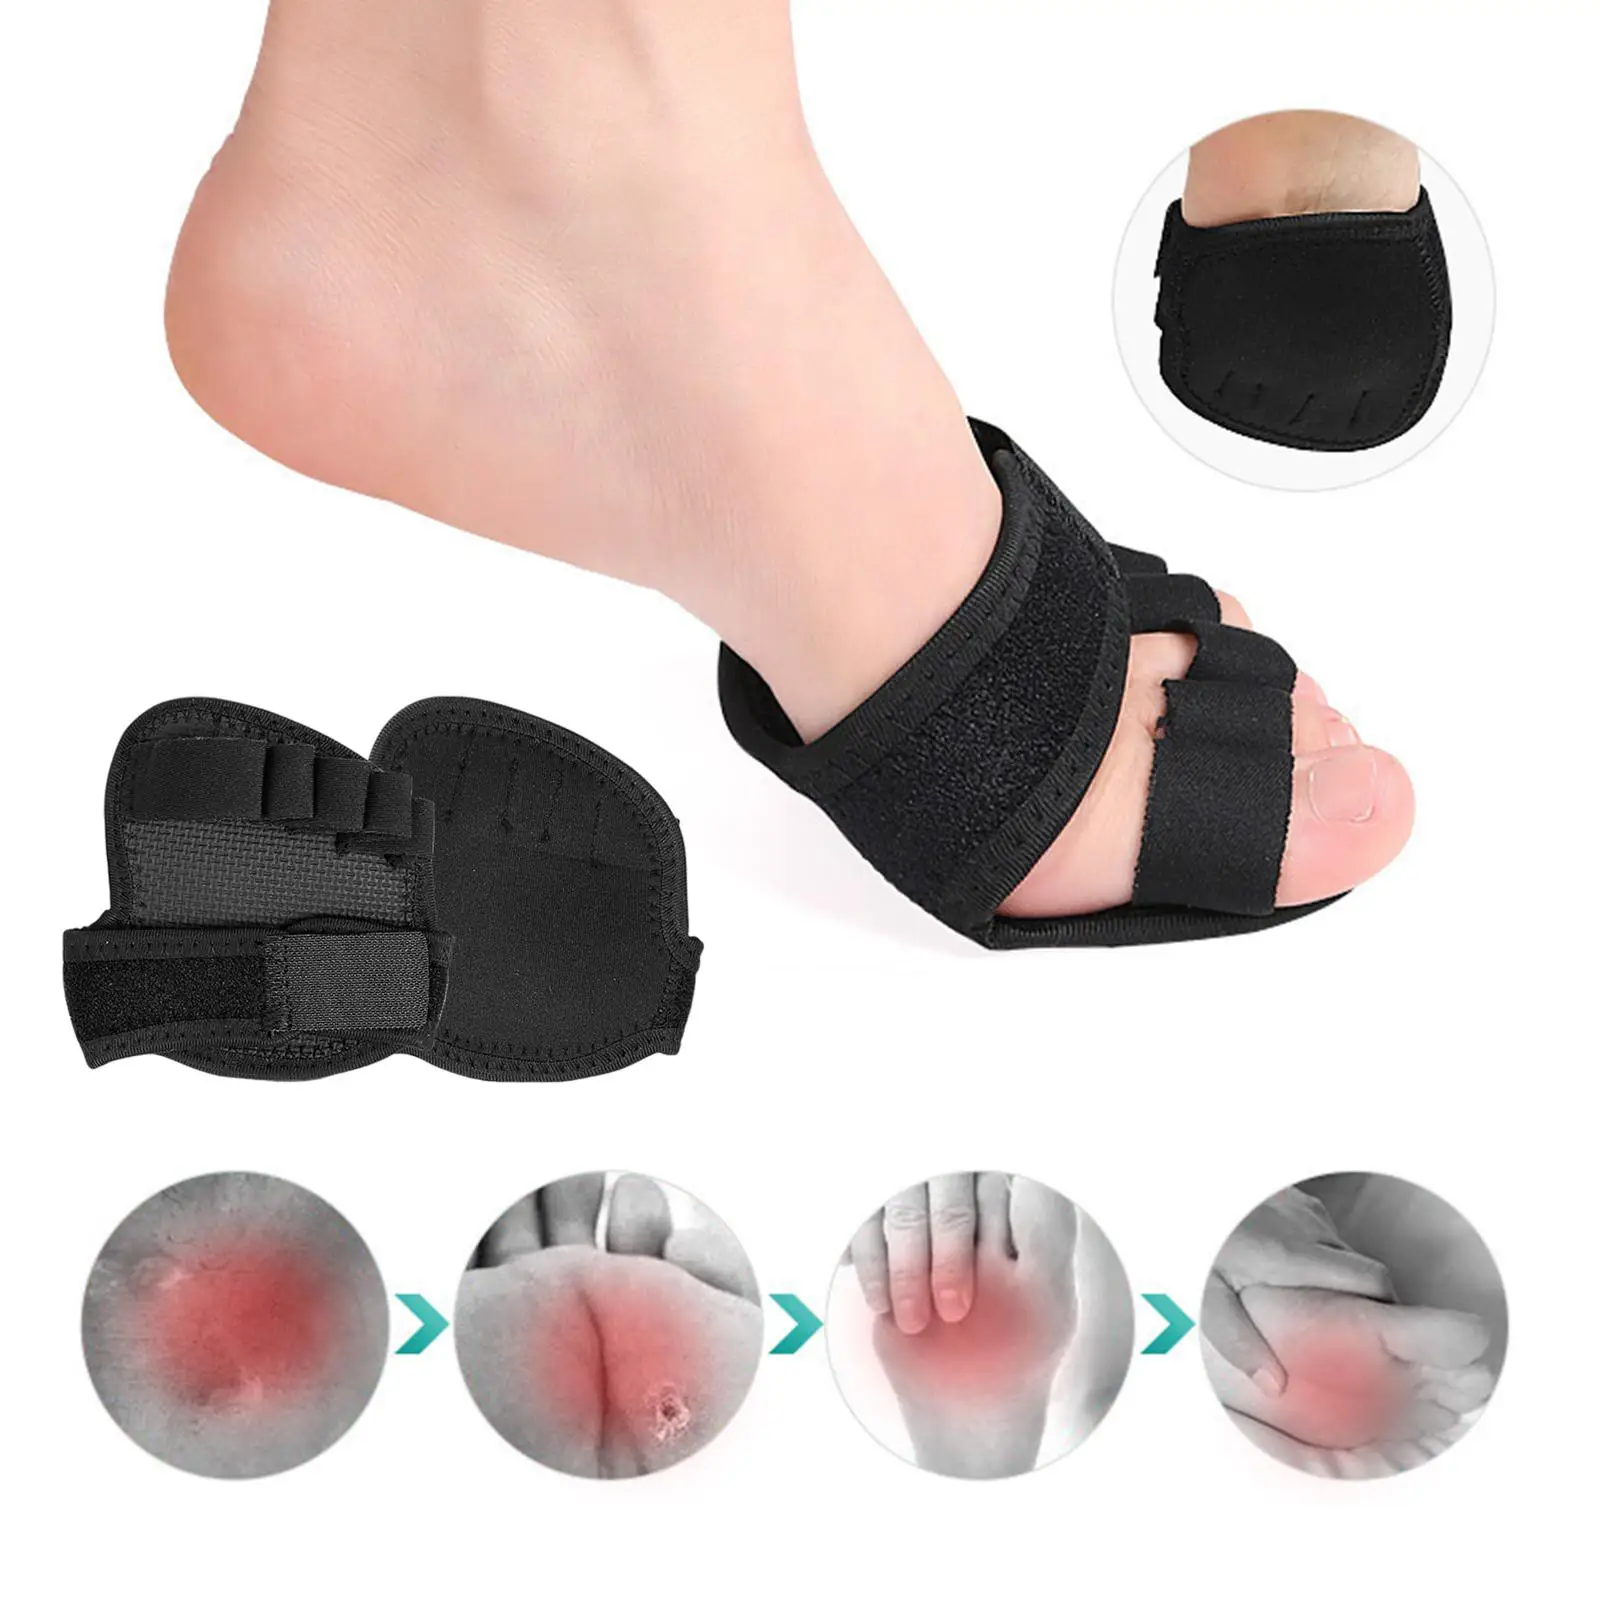 Universal Toe Separator Soft Forefoot Pads Corrector Pedicure Socks for Realign Crooked Toes Hallux Valgus for Ballet Men Women